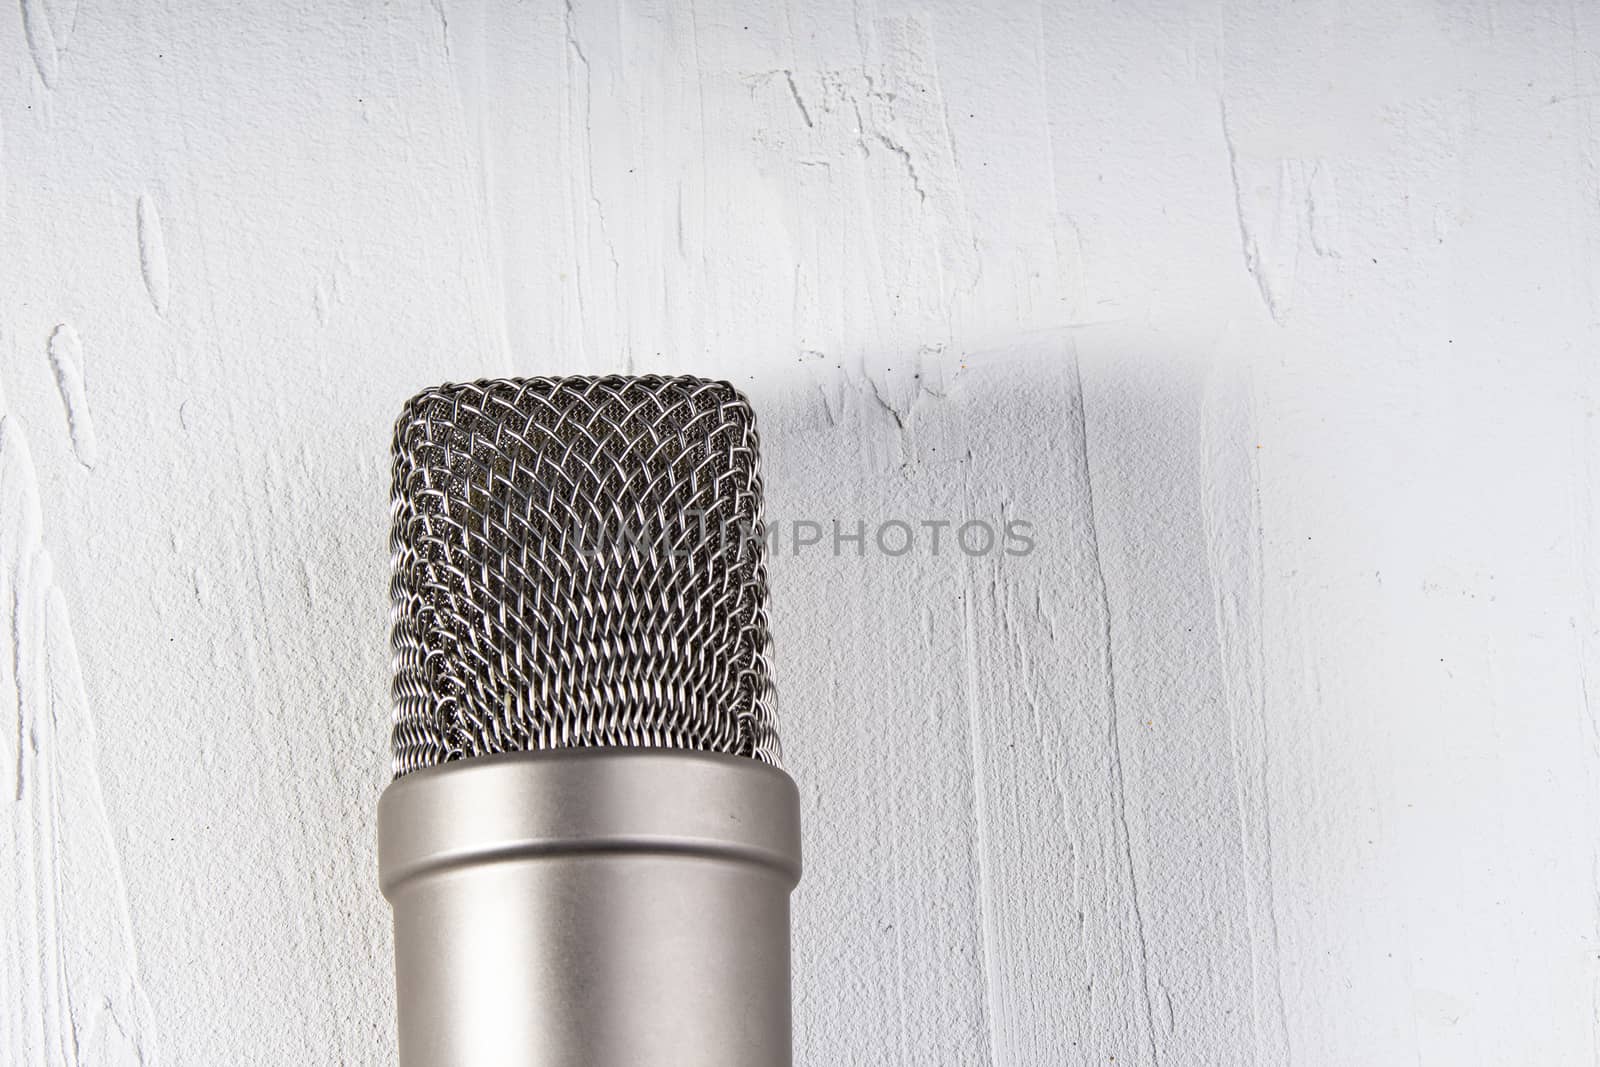 Microphone on lay on a texture background with a light